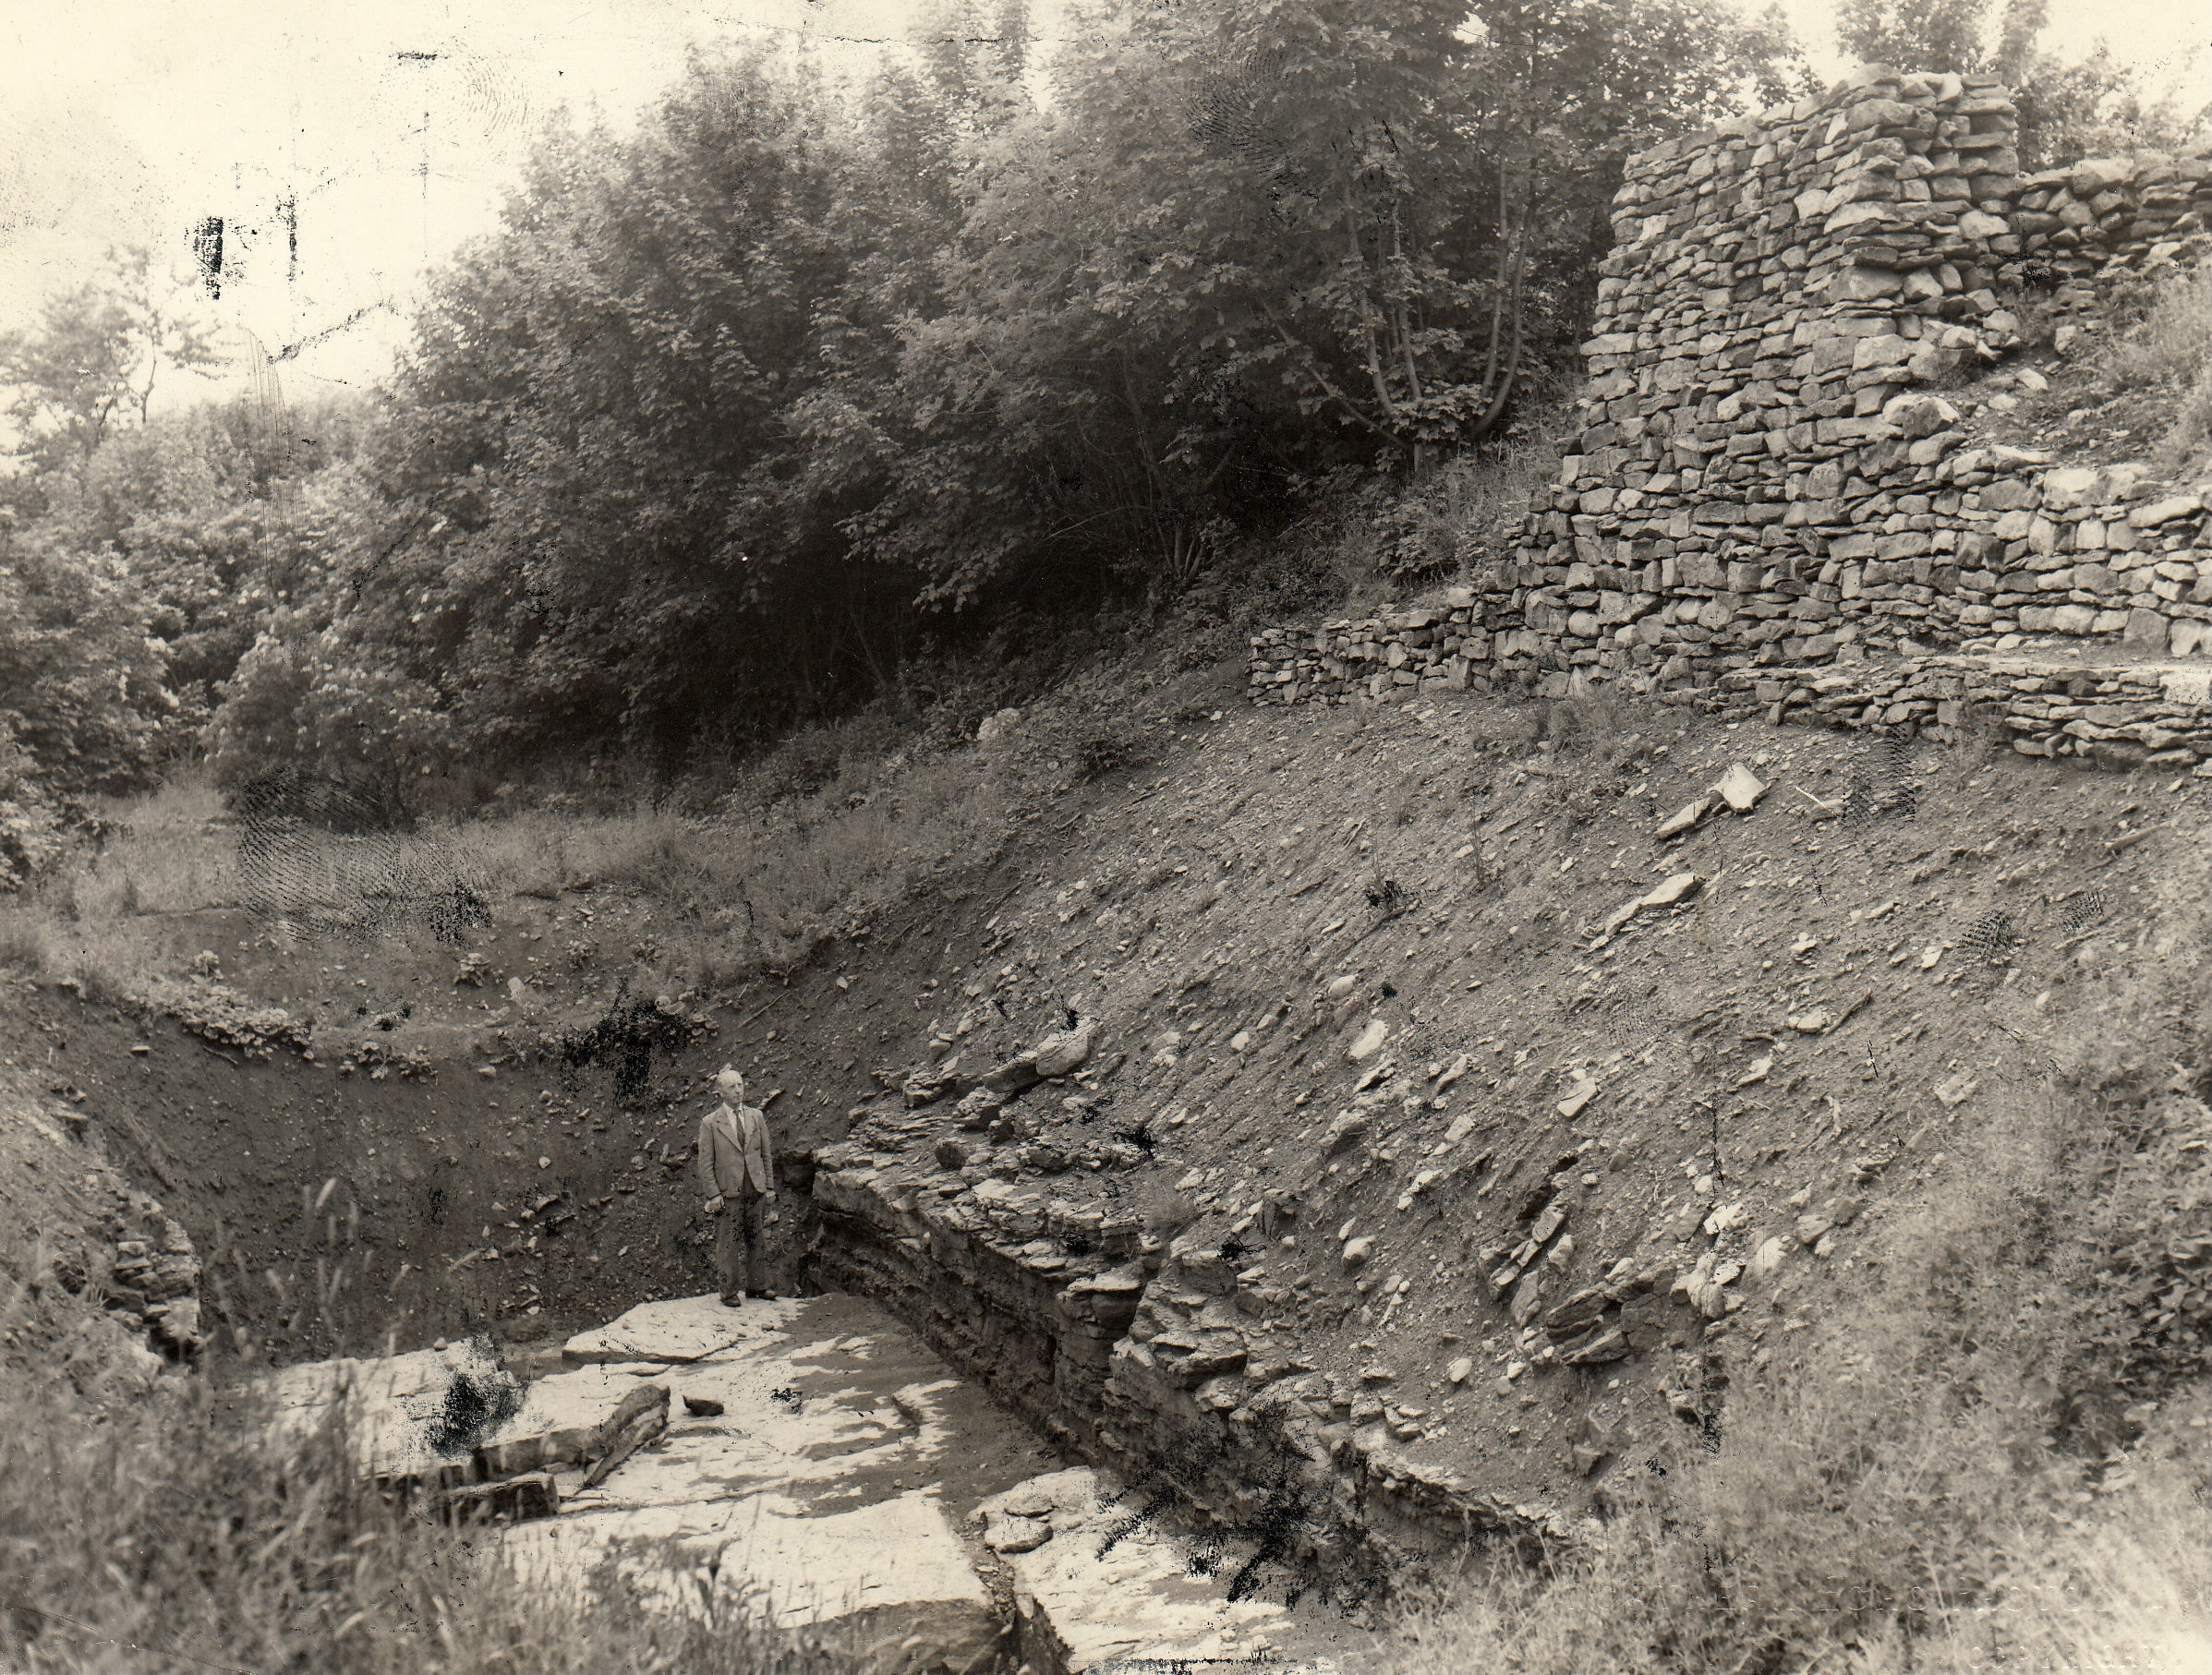 Wheelers Wall, probably with George Burdon standing in it in 1951, which can still be seen at Forcett beside the Stanwick camp